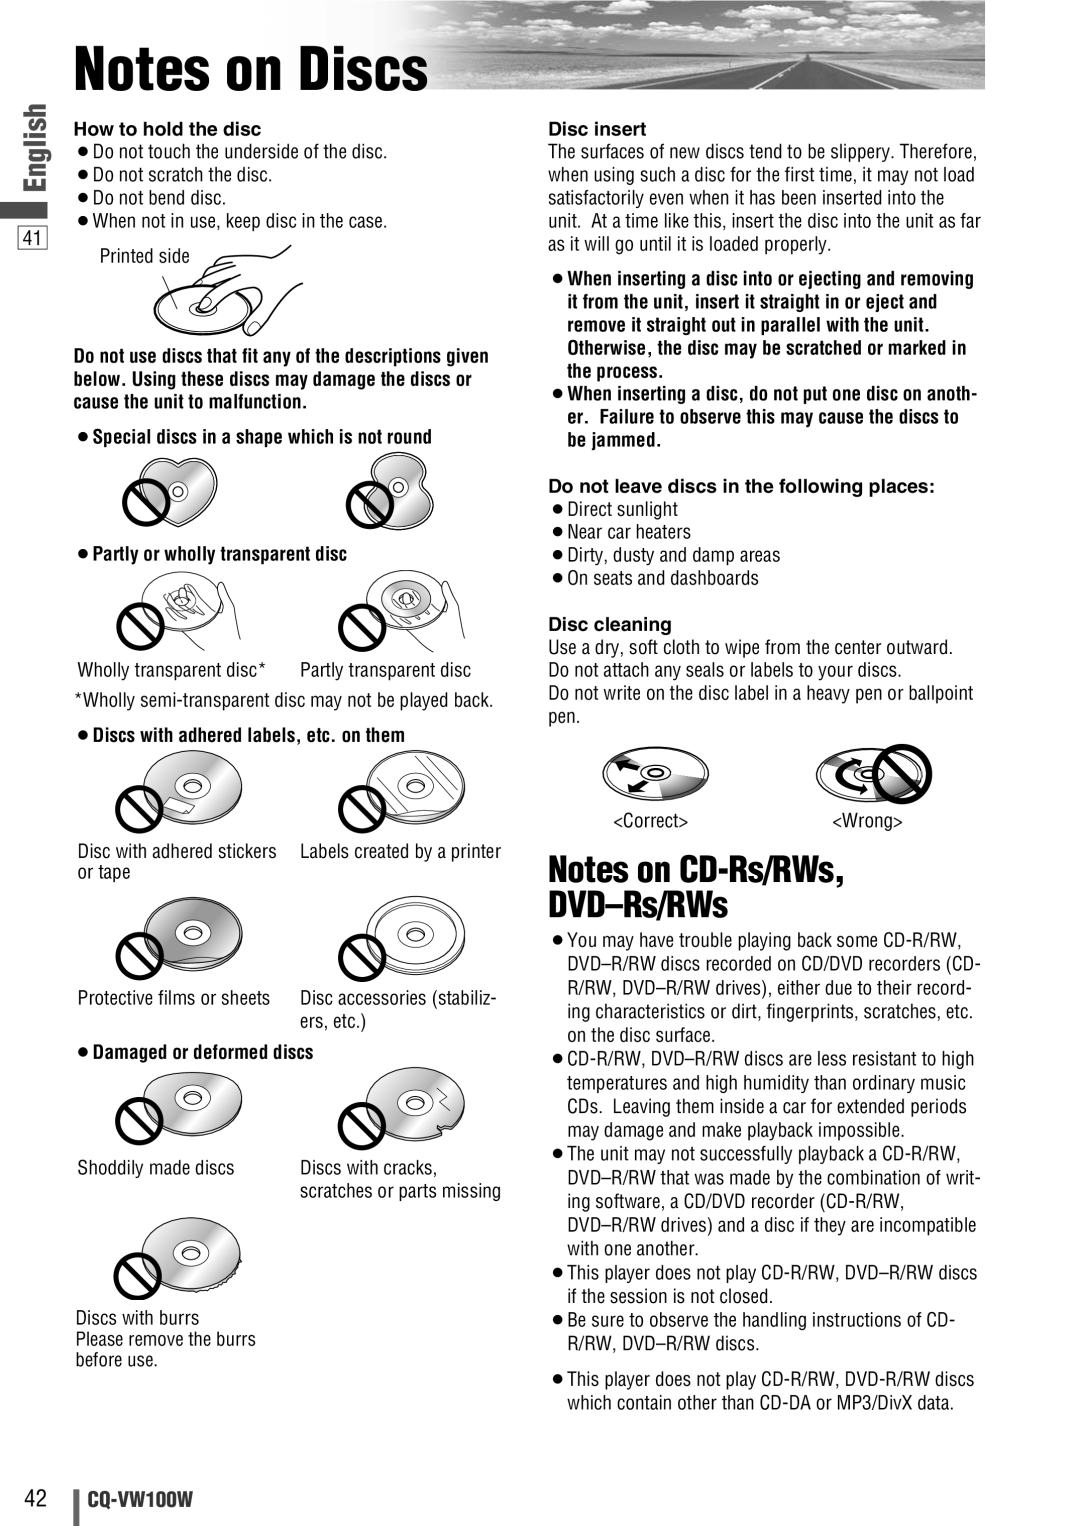 Panasonic CQ-VW100W manual Notes on Discs, Notes on CD-Rs/RWs DVD-Rs/RWs, How to hold the disc, ¡Damaged or deformed discs 